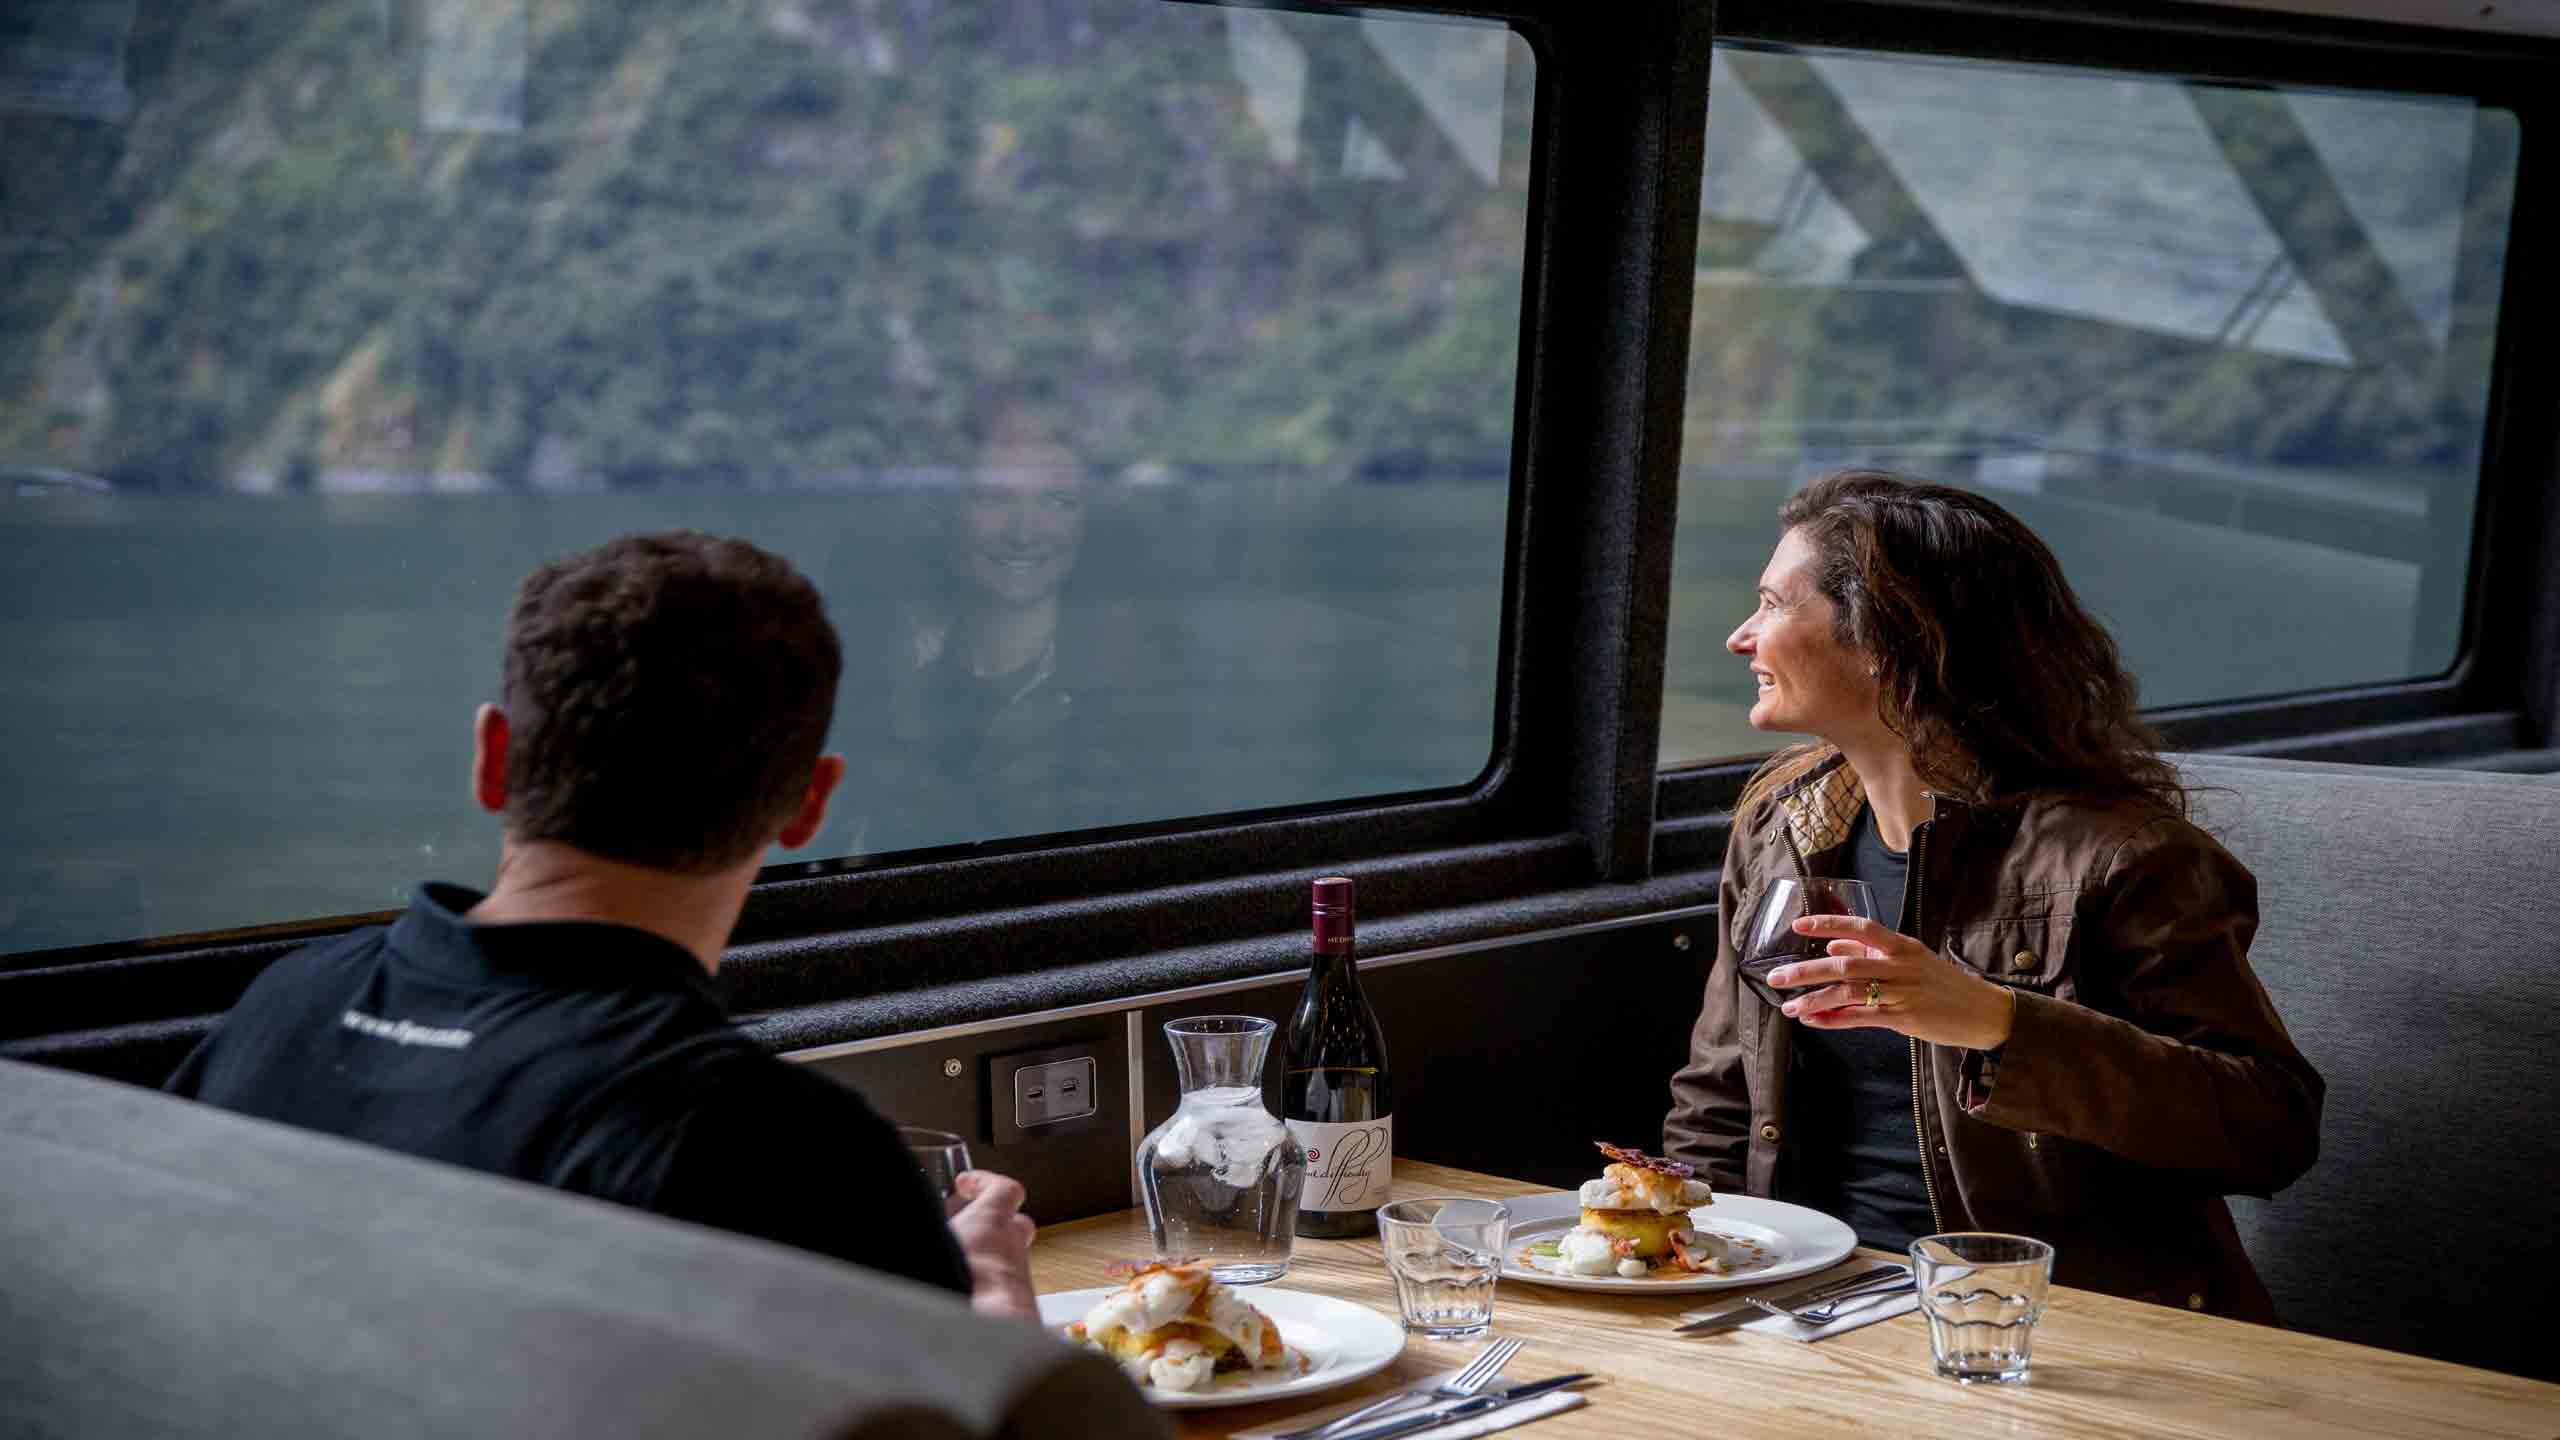 Fiordland-jewel-milford-sounds-new-zealand-dining-looking-out-window